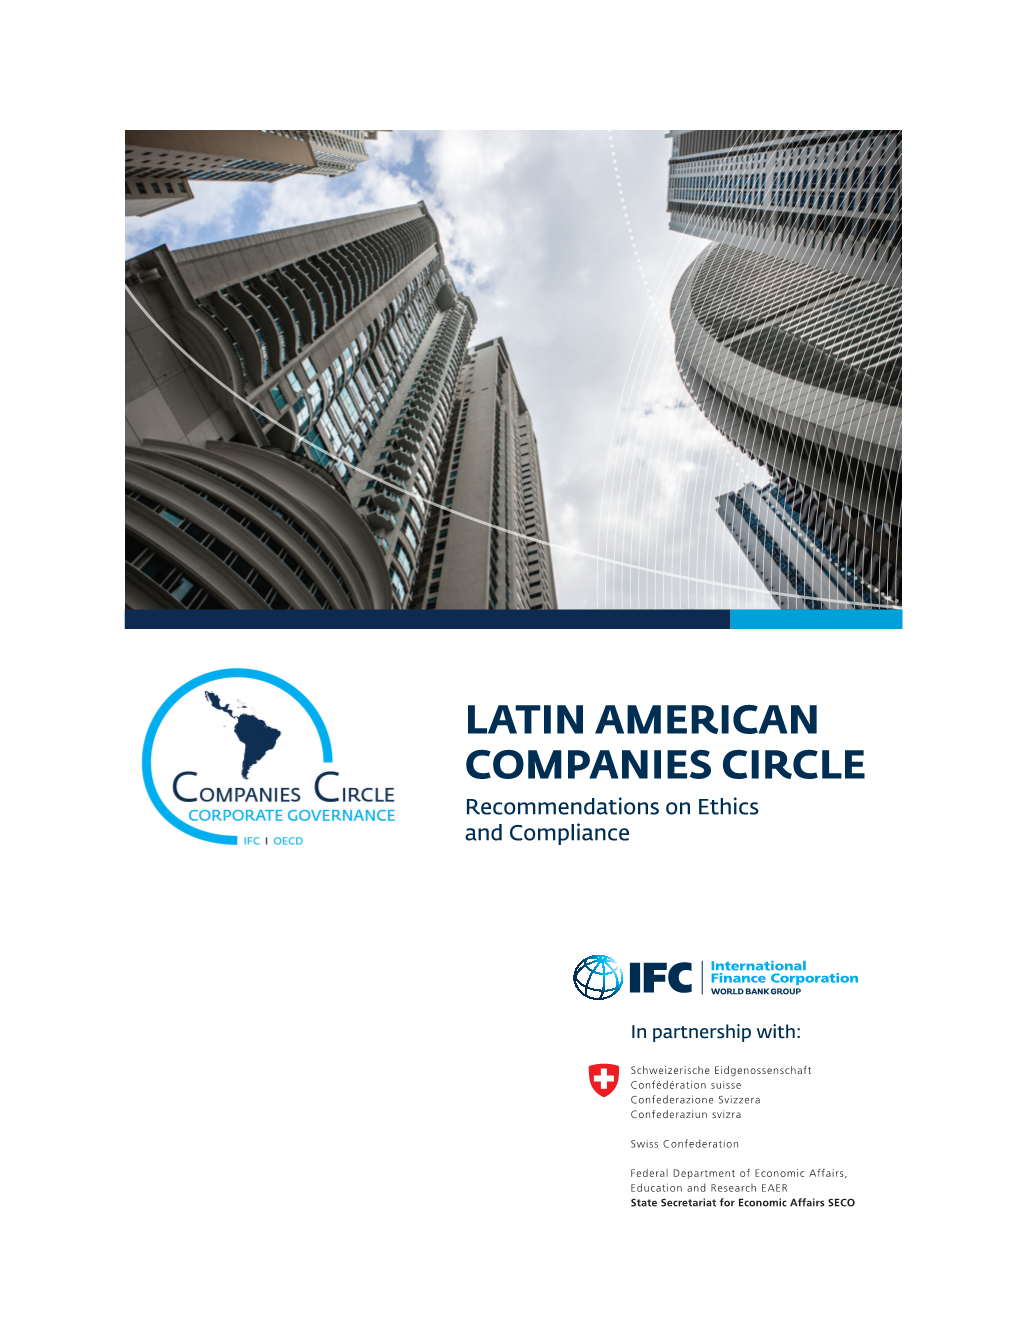 LATIN AMERICAN COMPANIES CIRCLE Recommendations on Ethics and Compliance